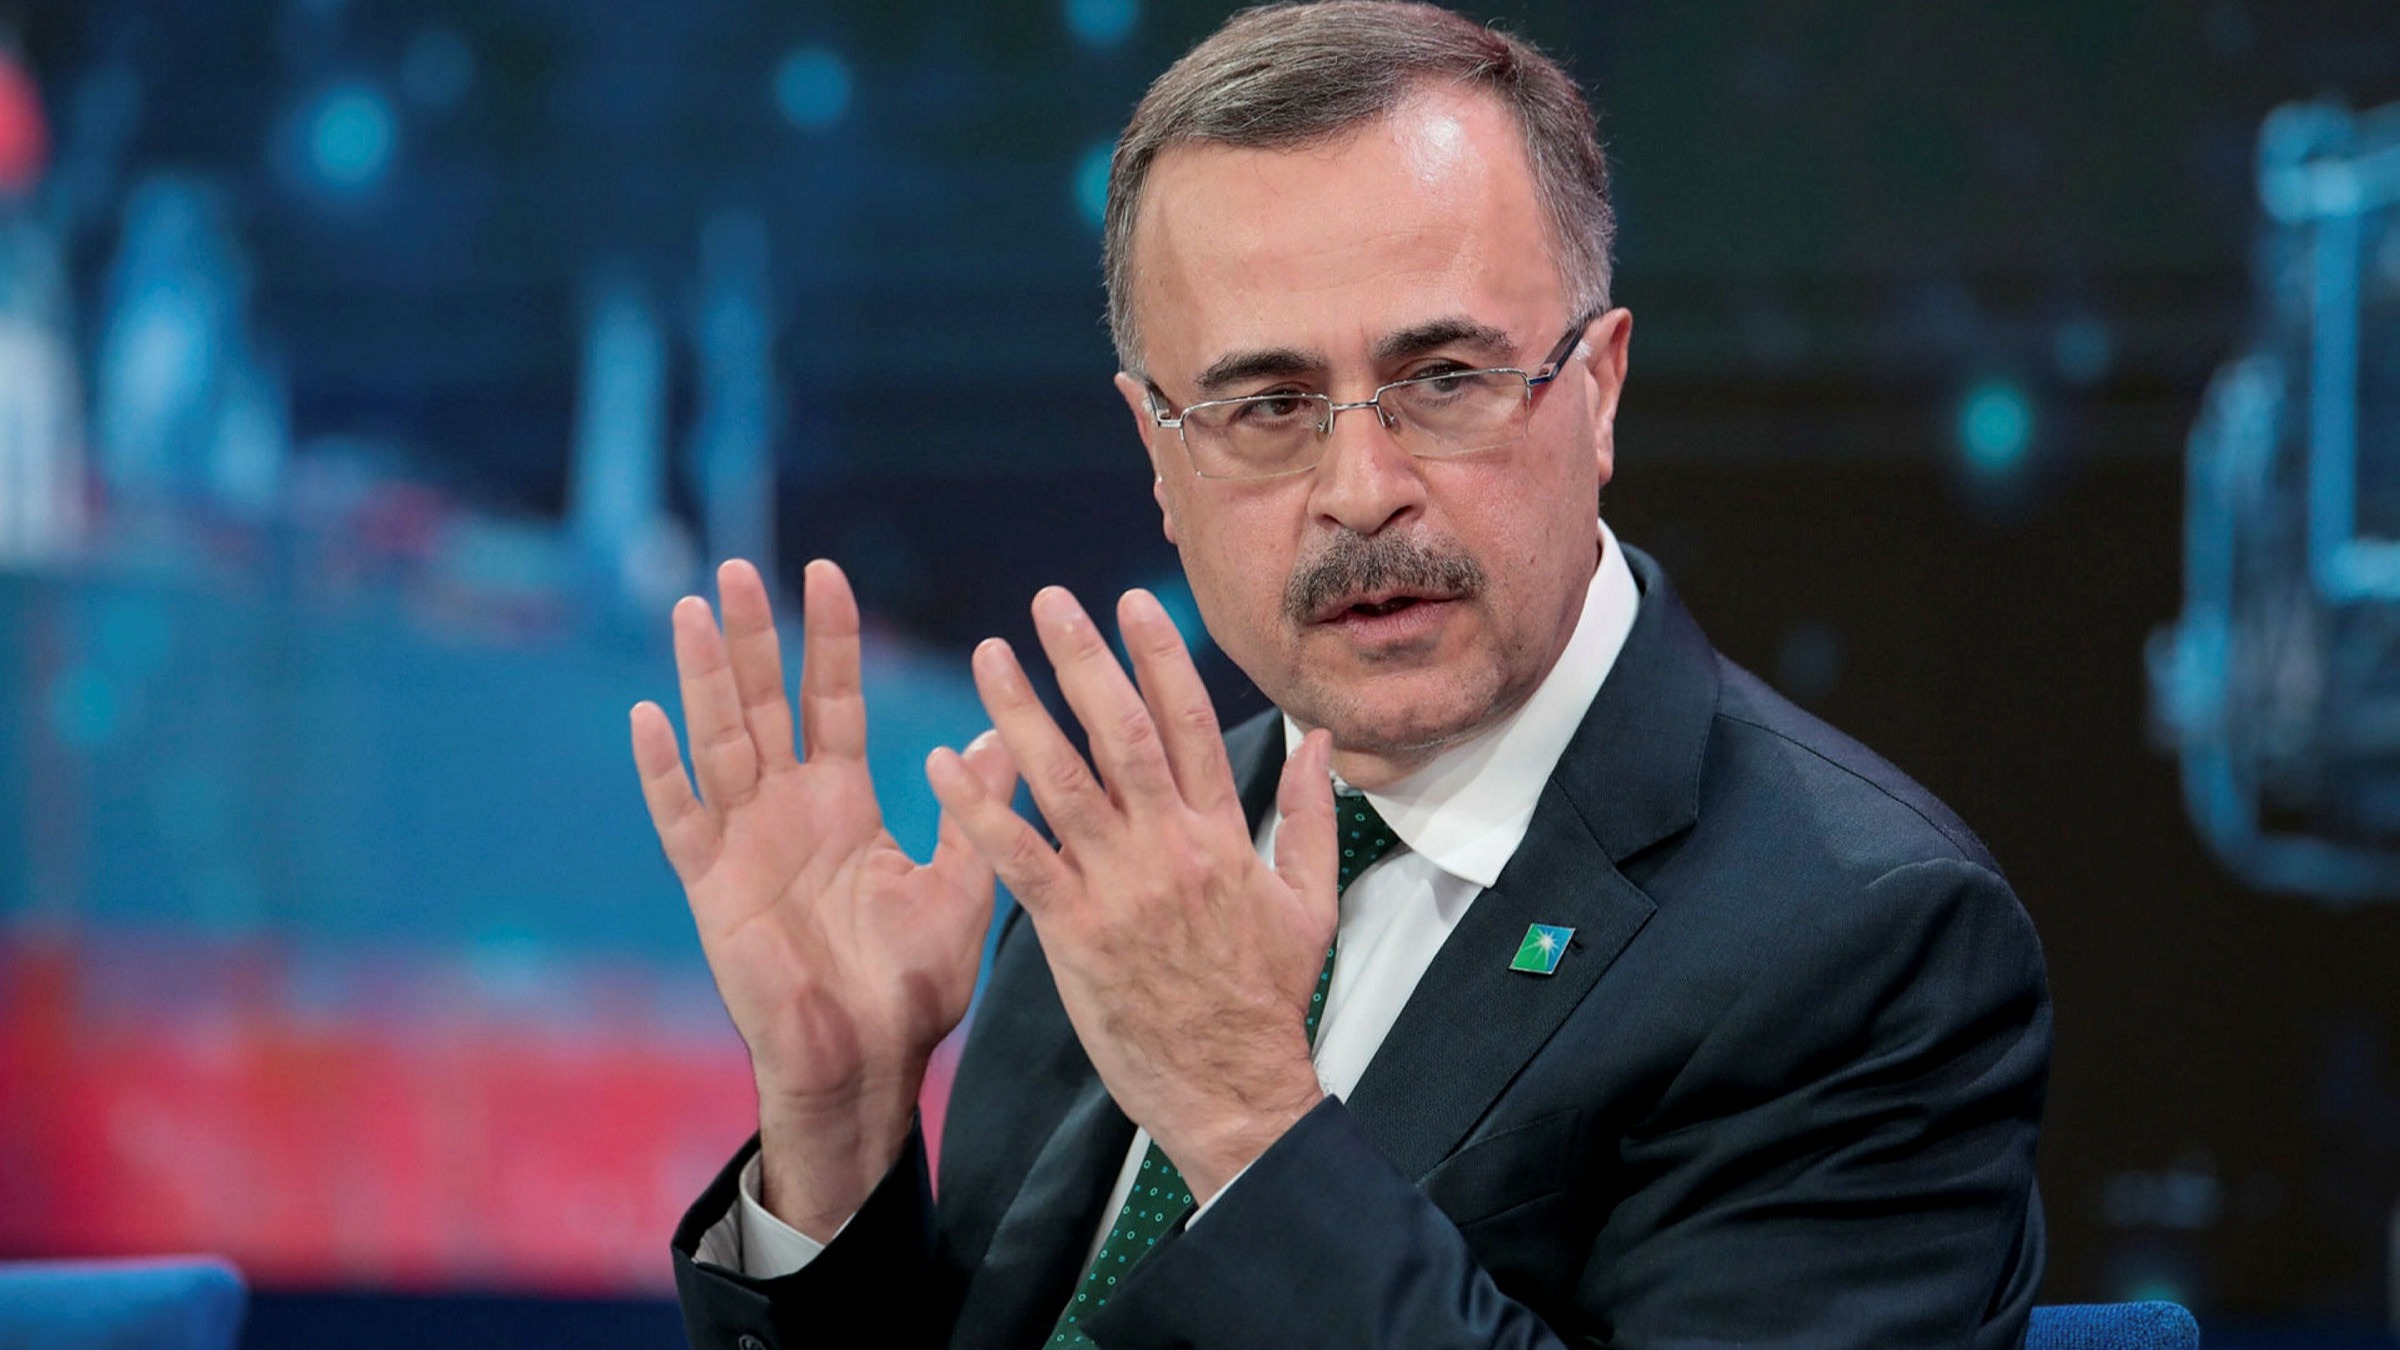 Saudi Aramco warns of &#39;social unrest&#39; if fossil fuels ditched too quickly | Financial Times